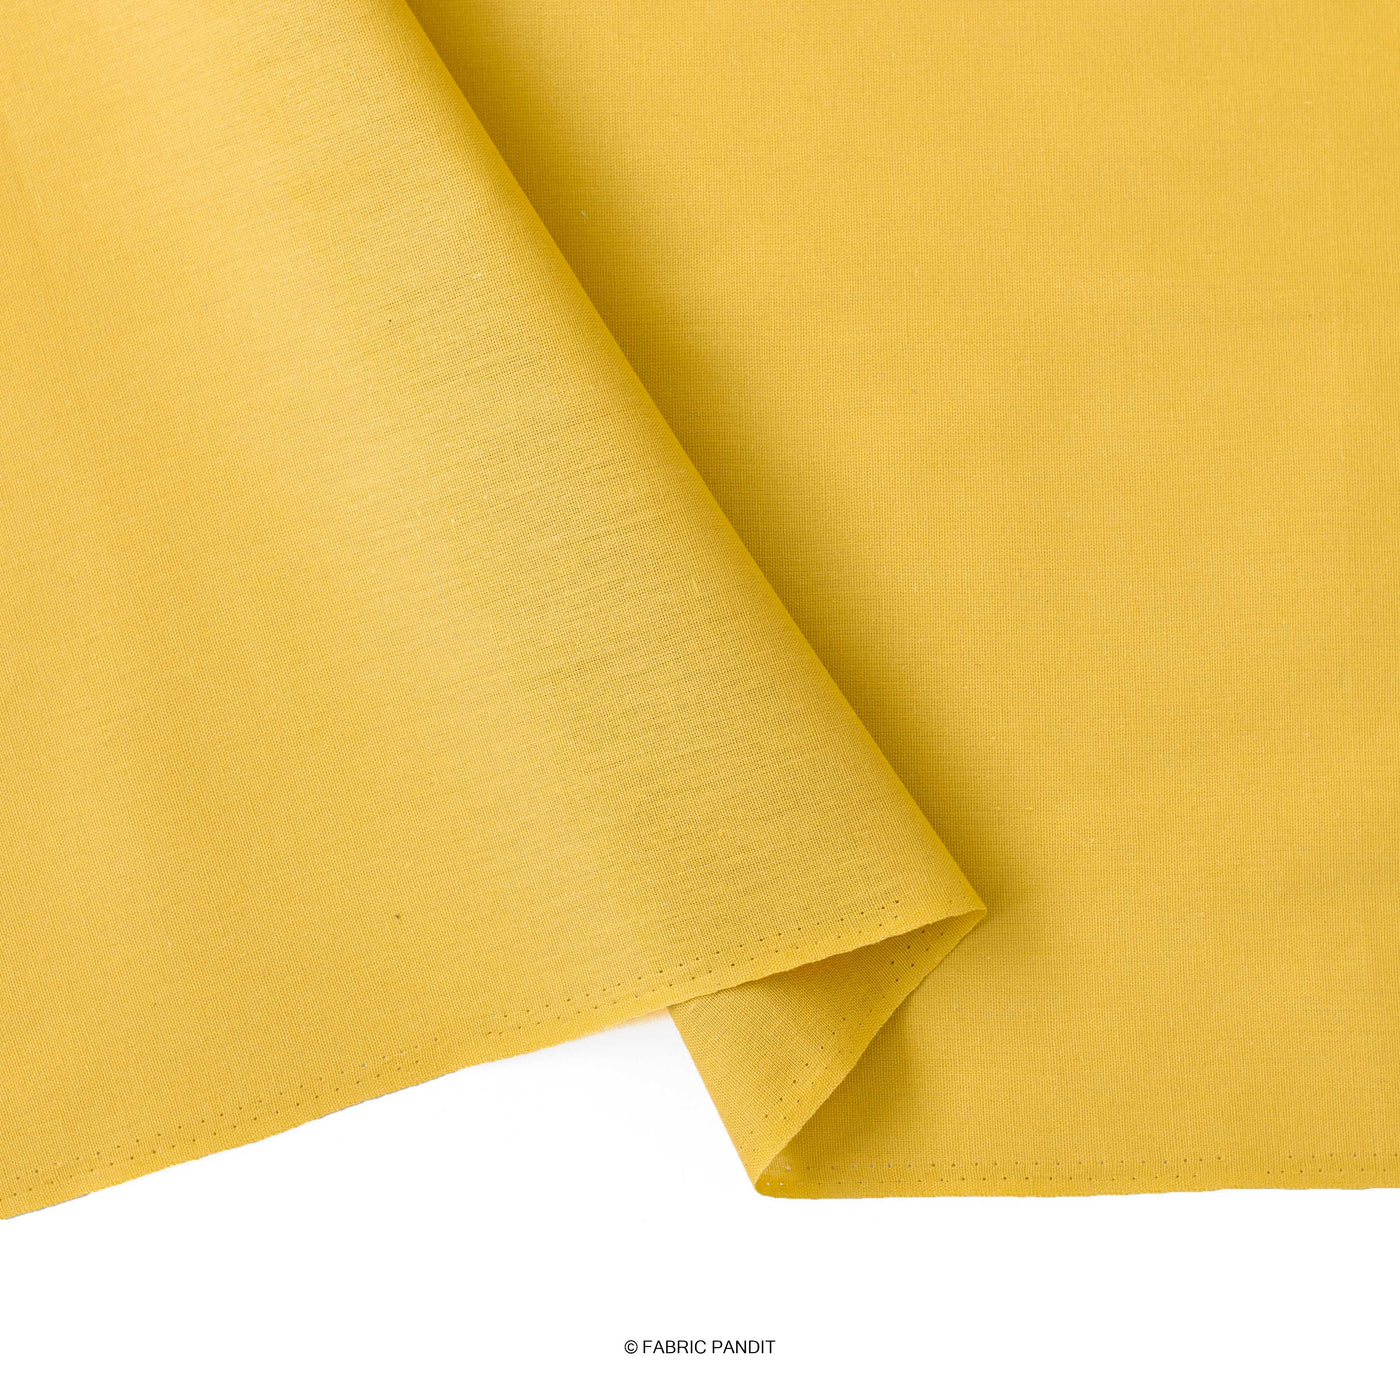 Cotton Linen Fabric Fabric Mustard Yellow Color Pure Cotton Linen Fabric (Width 52 Inches)